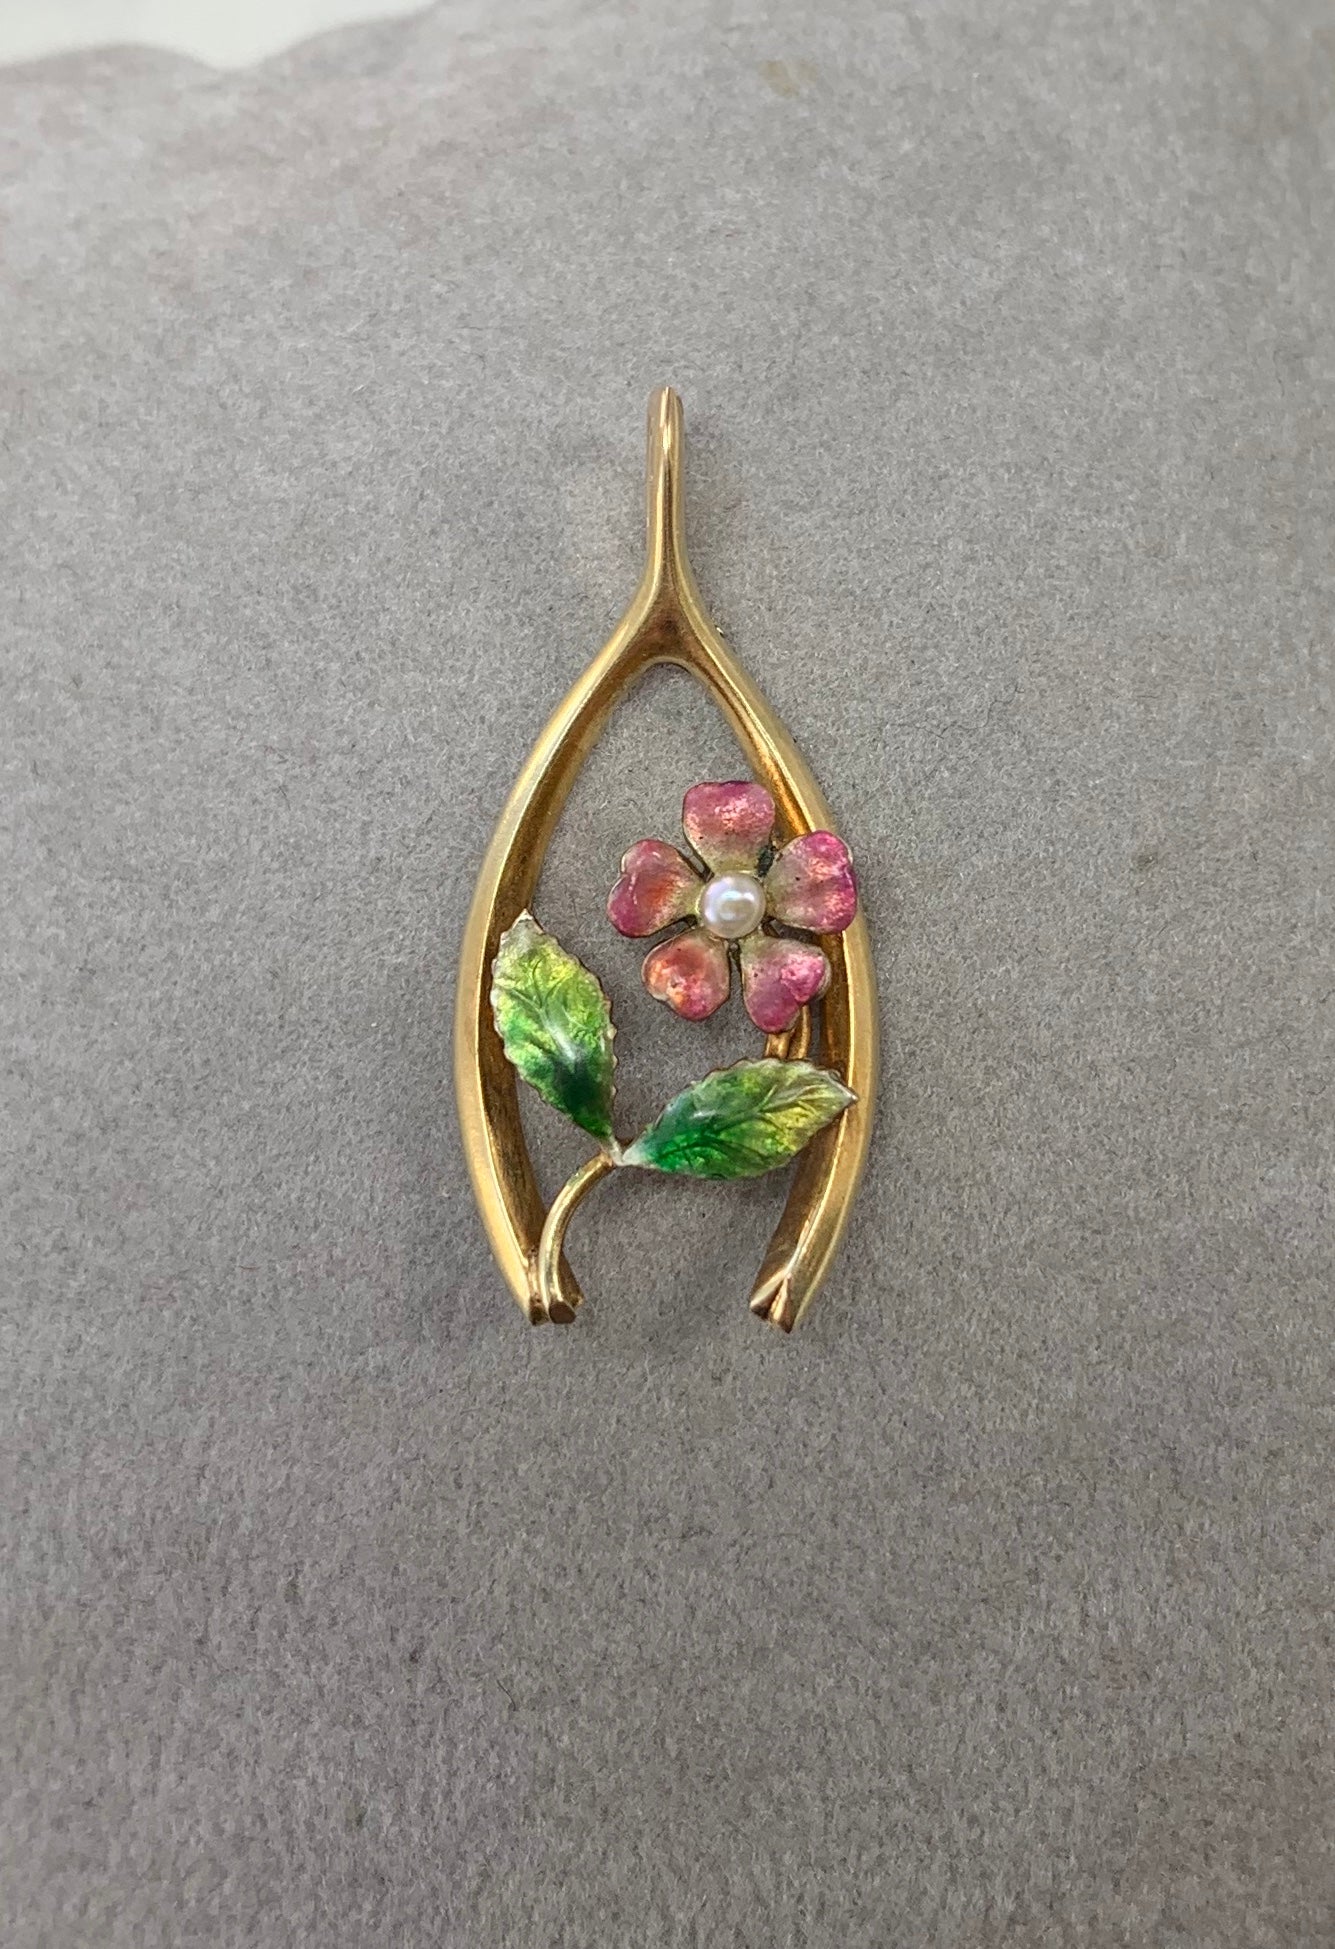 THIS IS A GORGEOUS VICTORIAN - ART NOUVEAU PENDANT NECKLACE IN THE FORM OF A WISHBONE OR HORSESHOE ADORNED WITH A GORGEOUS FORGET-ME-NOT FLOWER WITH STUNNING PINK, GREEN AND YELLOW ENAMEL WITH A CENTRAL PEARL IN 10 KARAT GOLD.  THIS IS ONE OF THE